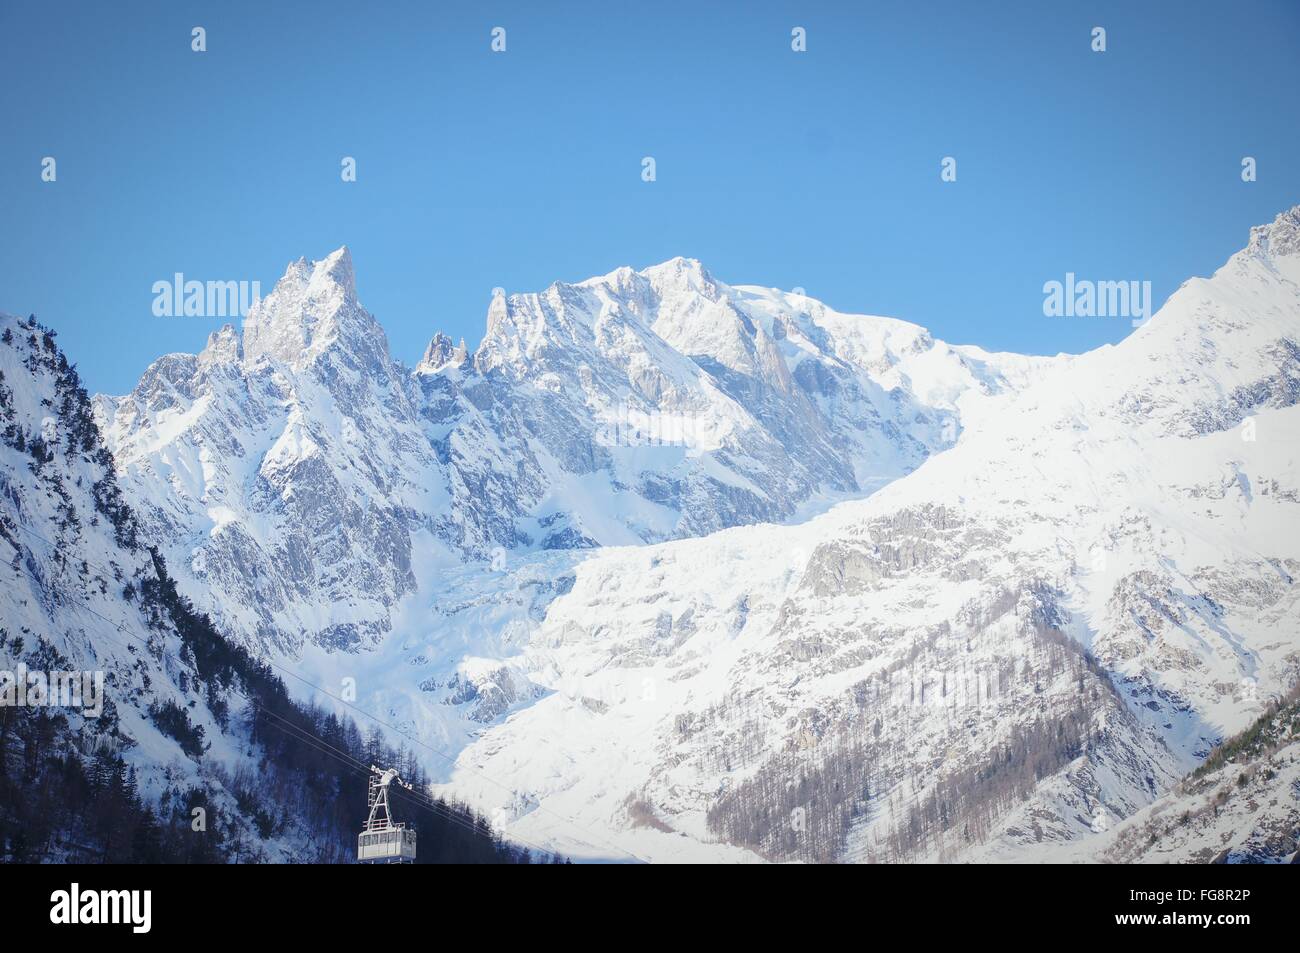 Scenic View Of Snowcapped Mountain Against Clear Sky Stock Photo